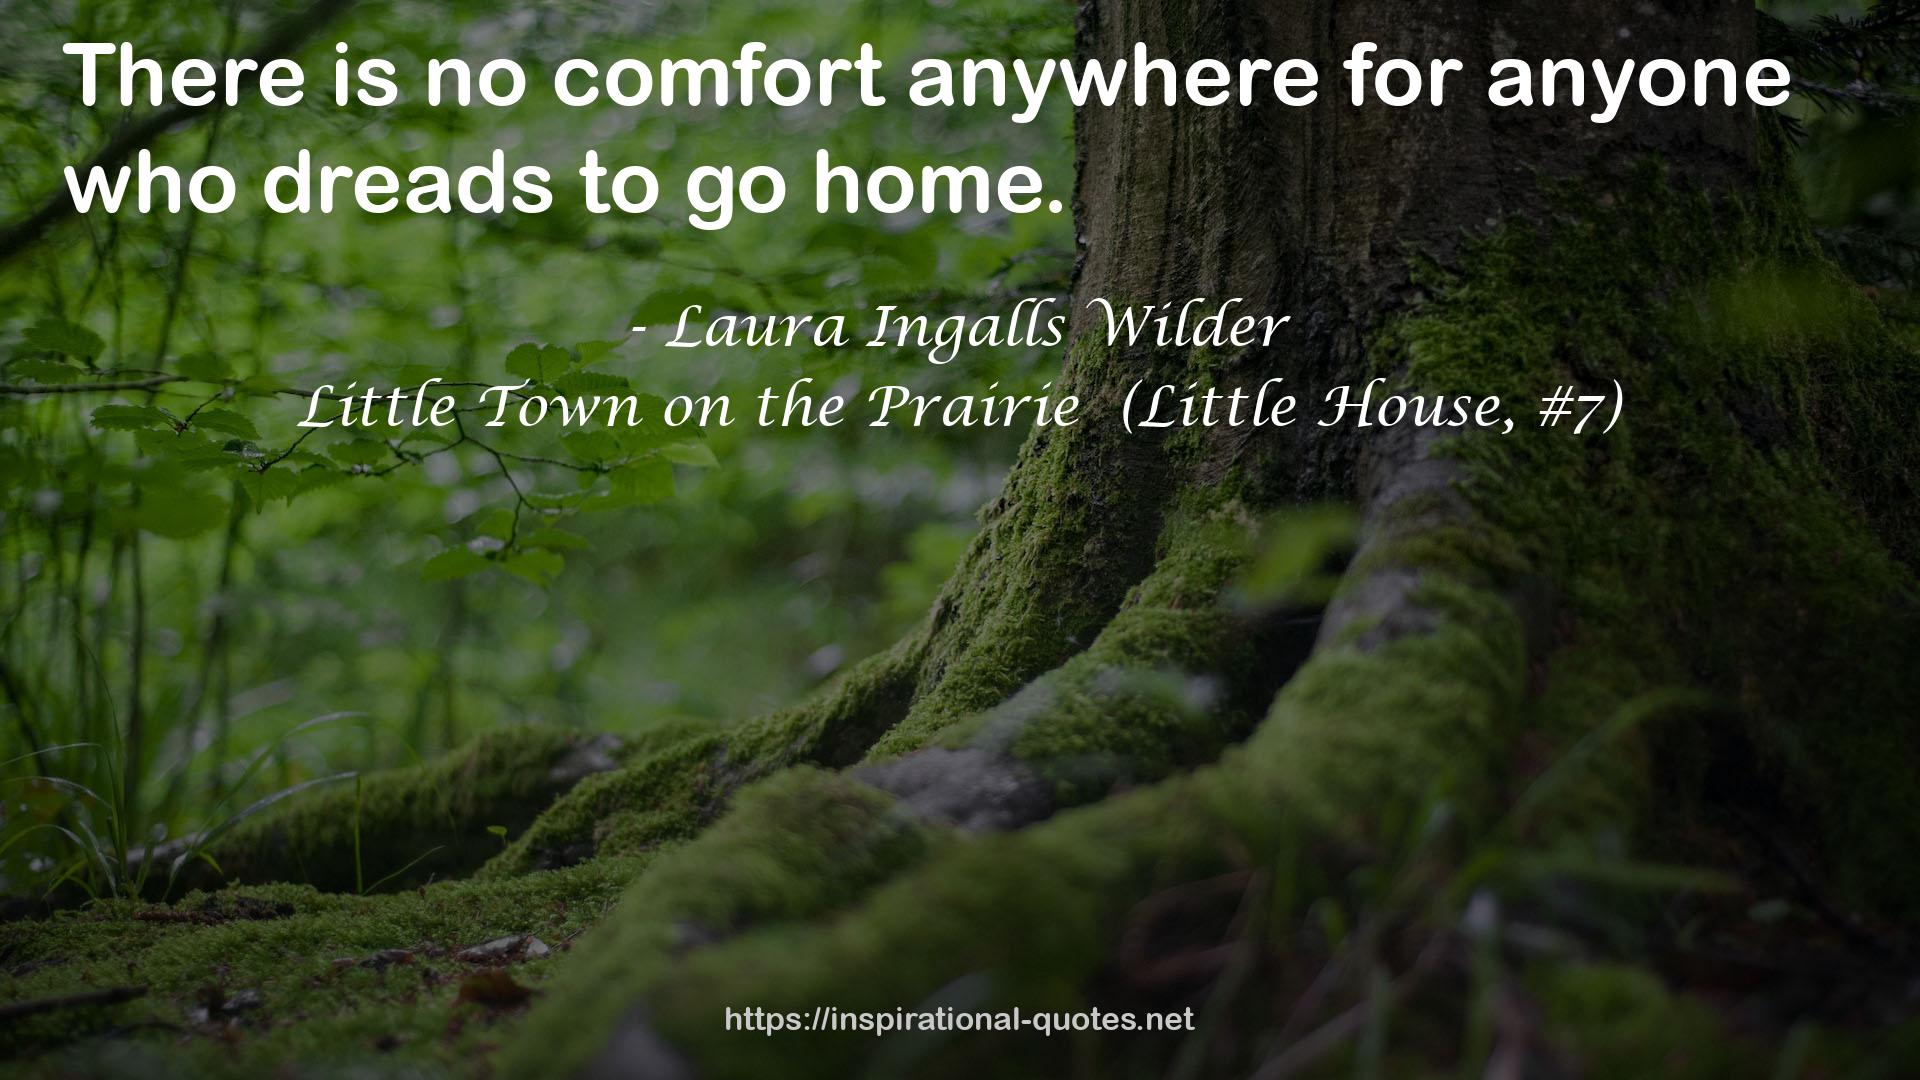 Little Town on the Prairie  (Little House, #7) QUOTES